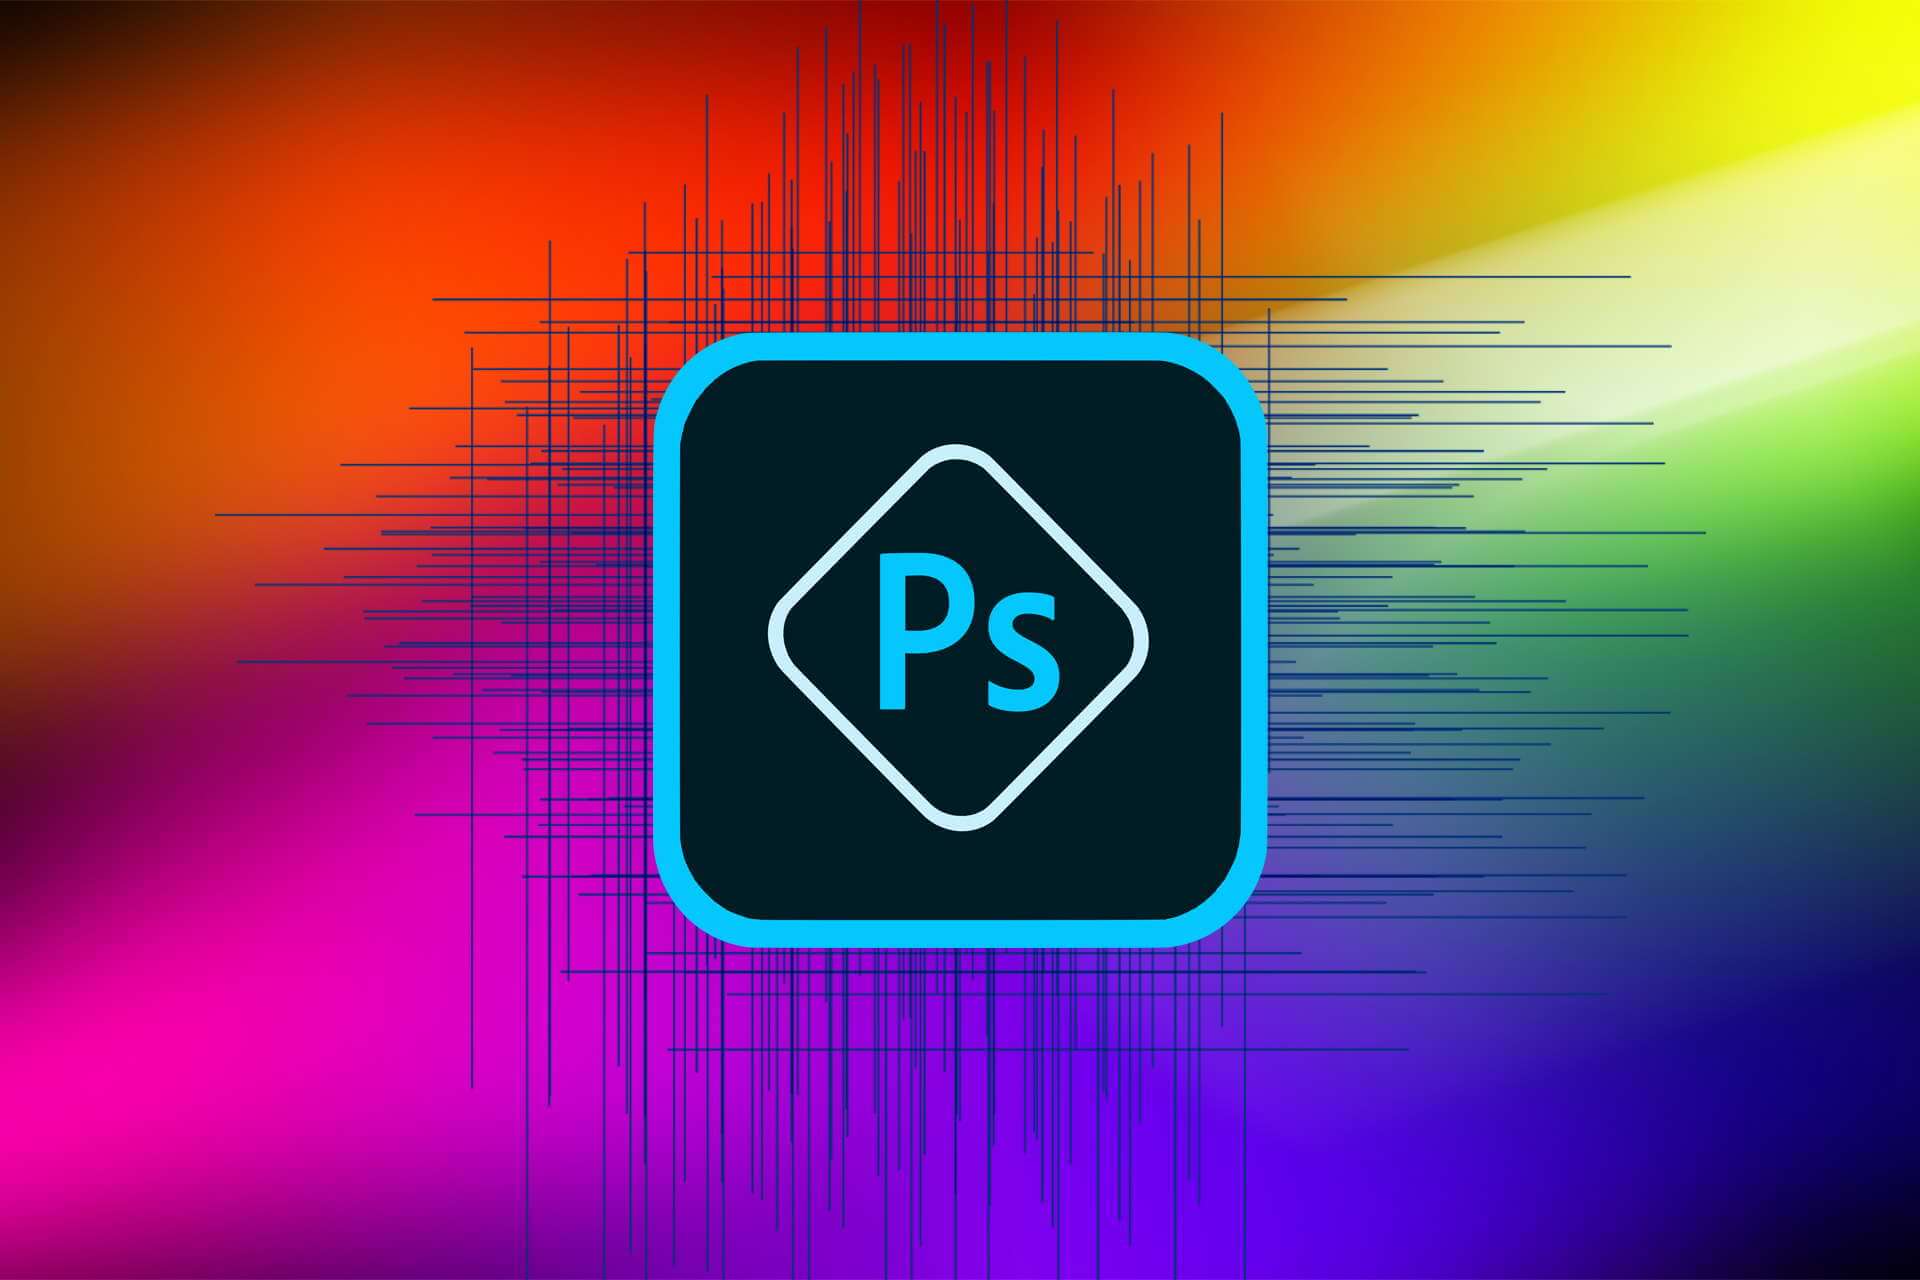 Install Photoshop without Creative Cloud